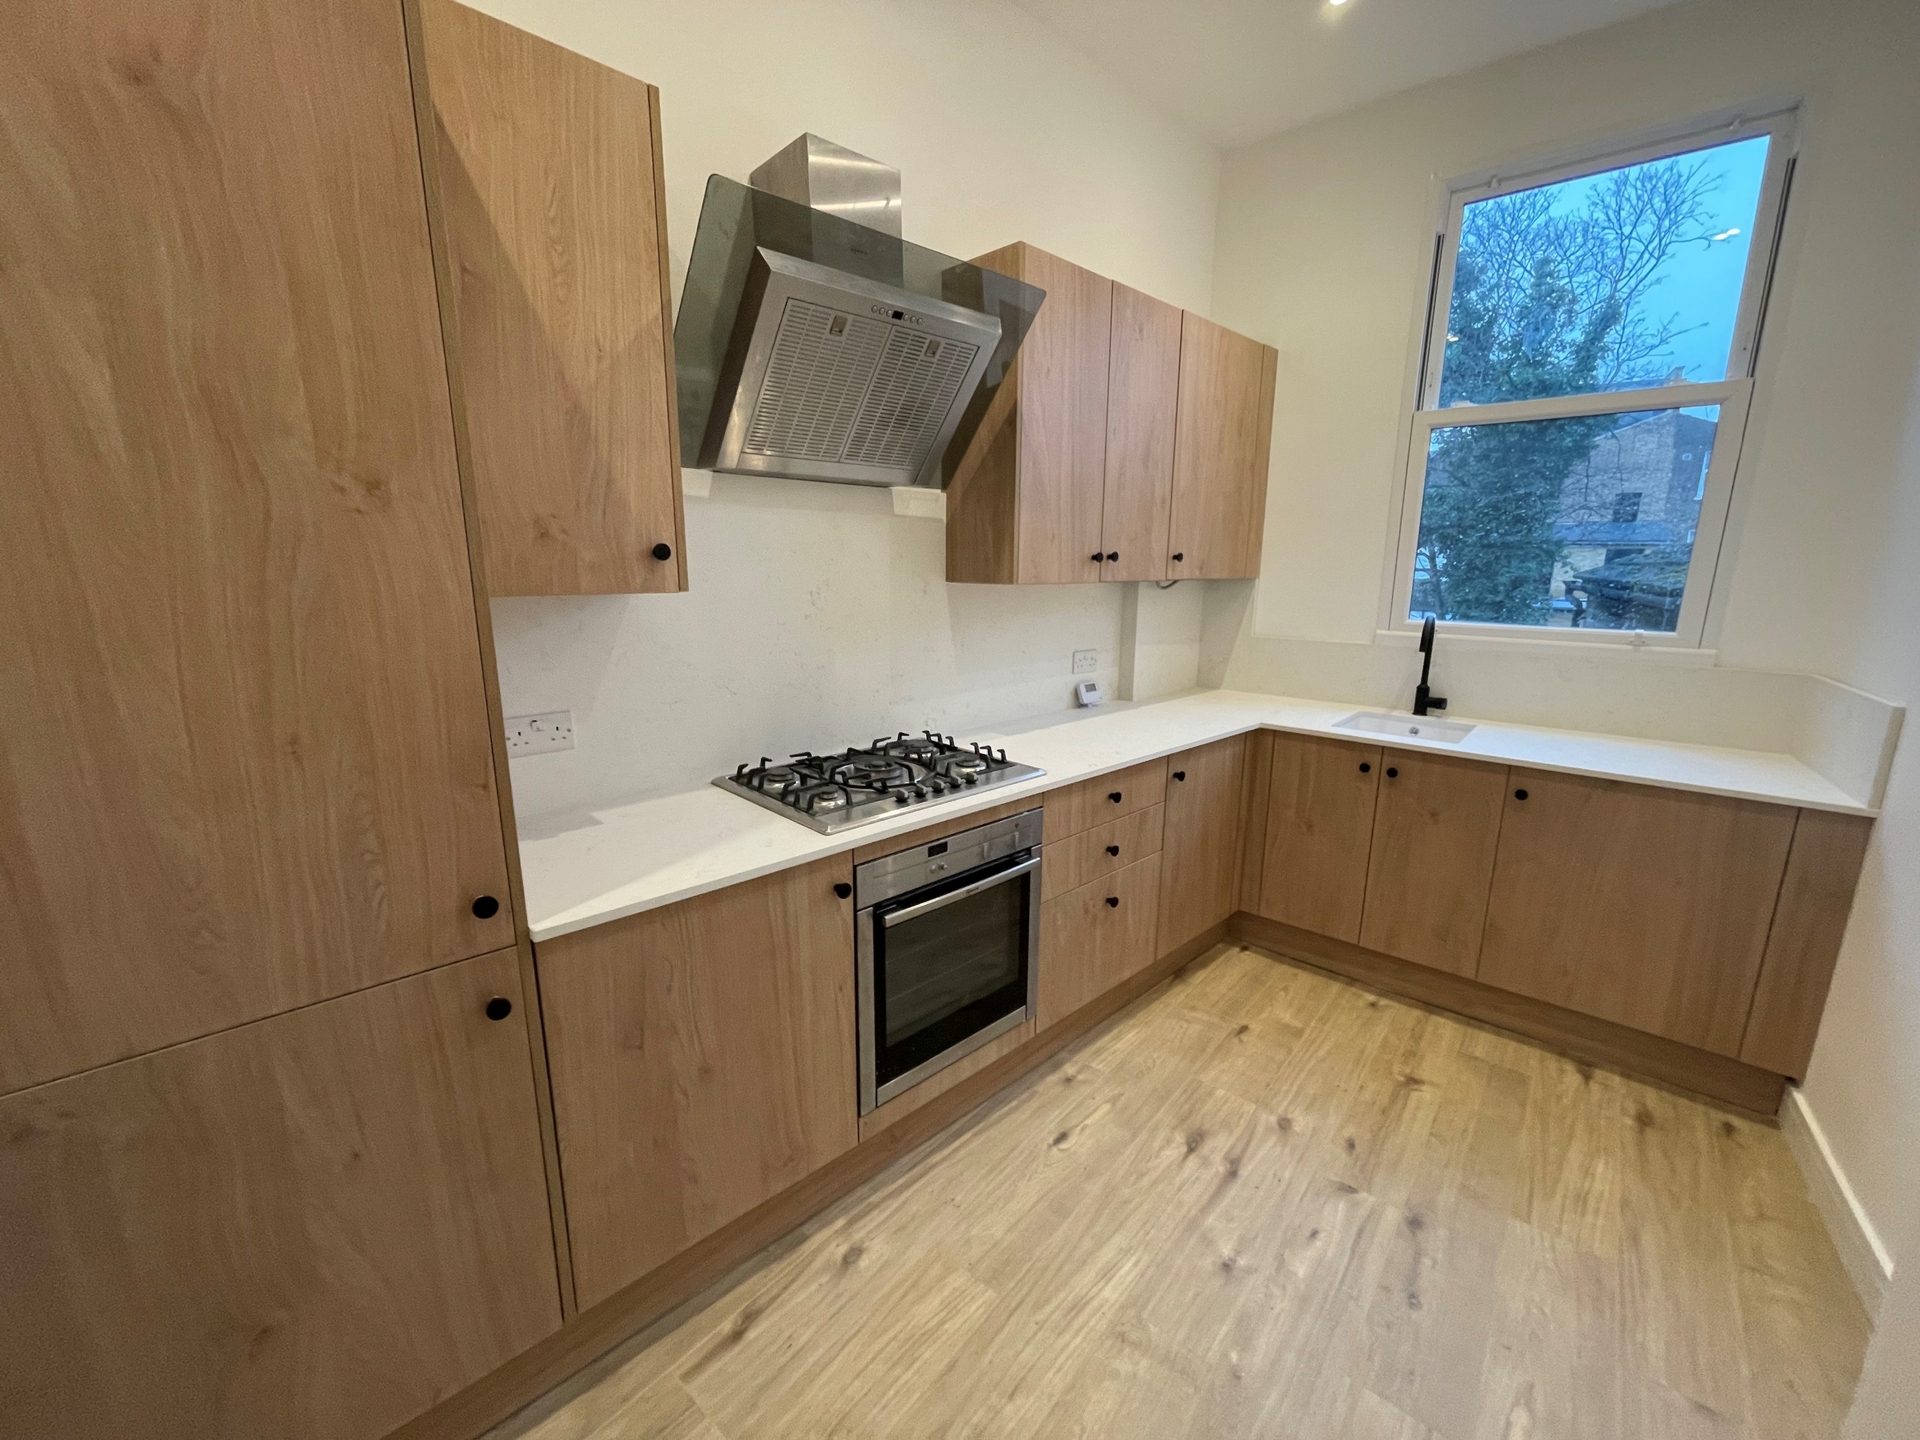 2 Bedroom Flat to rent in Holloway, London, N7